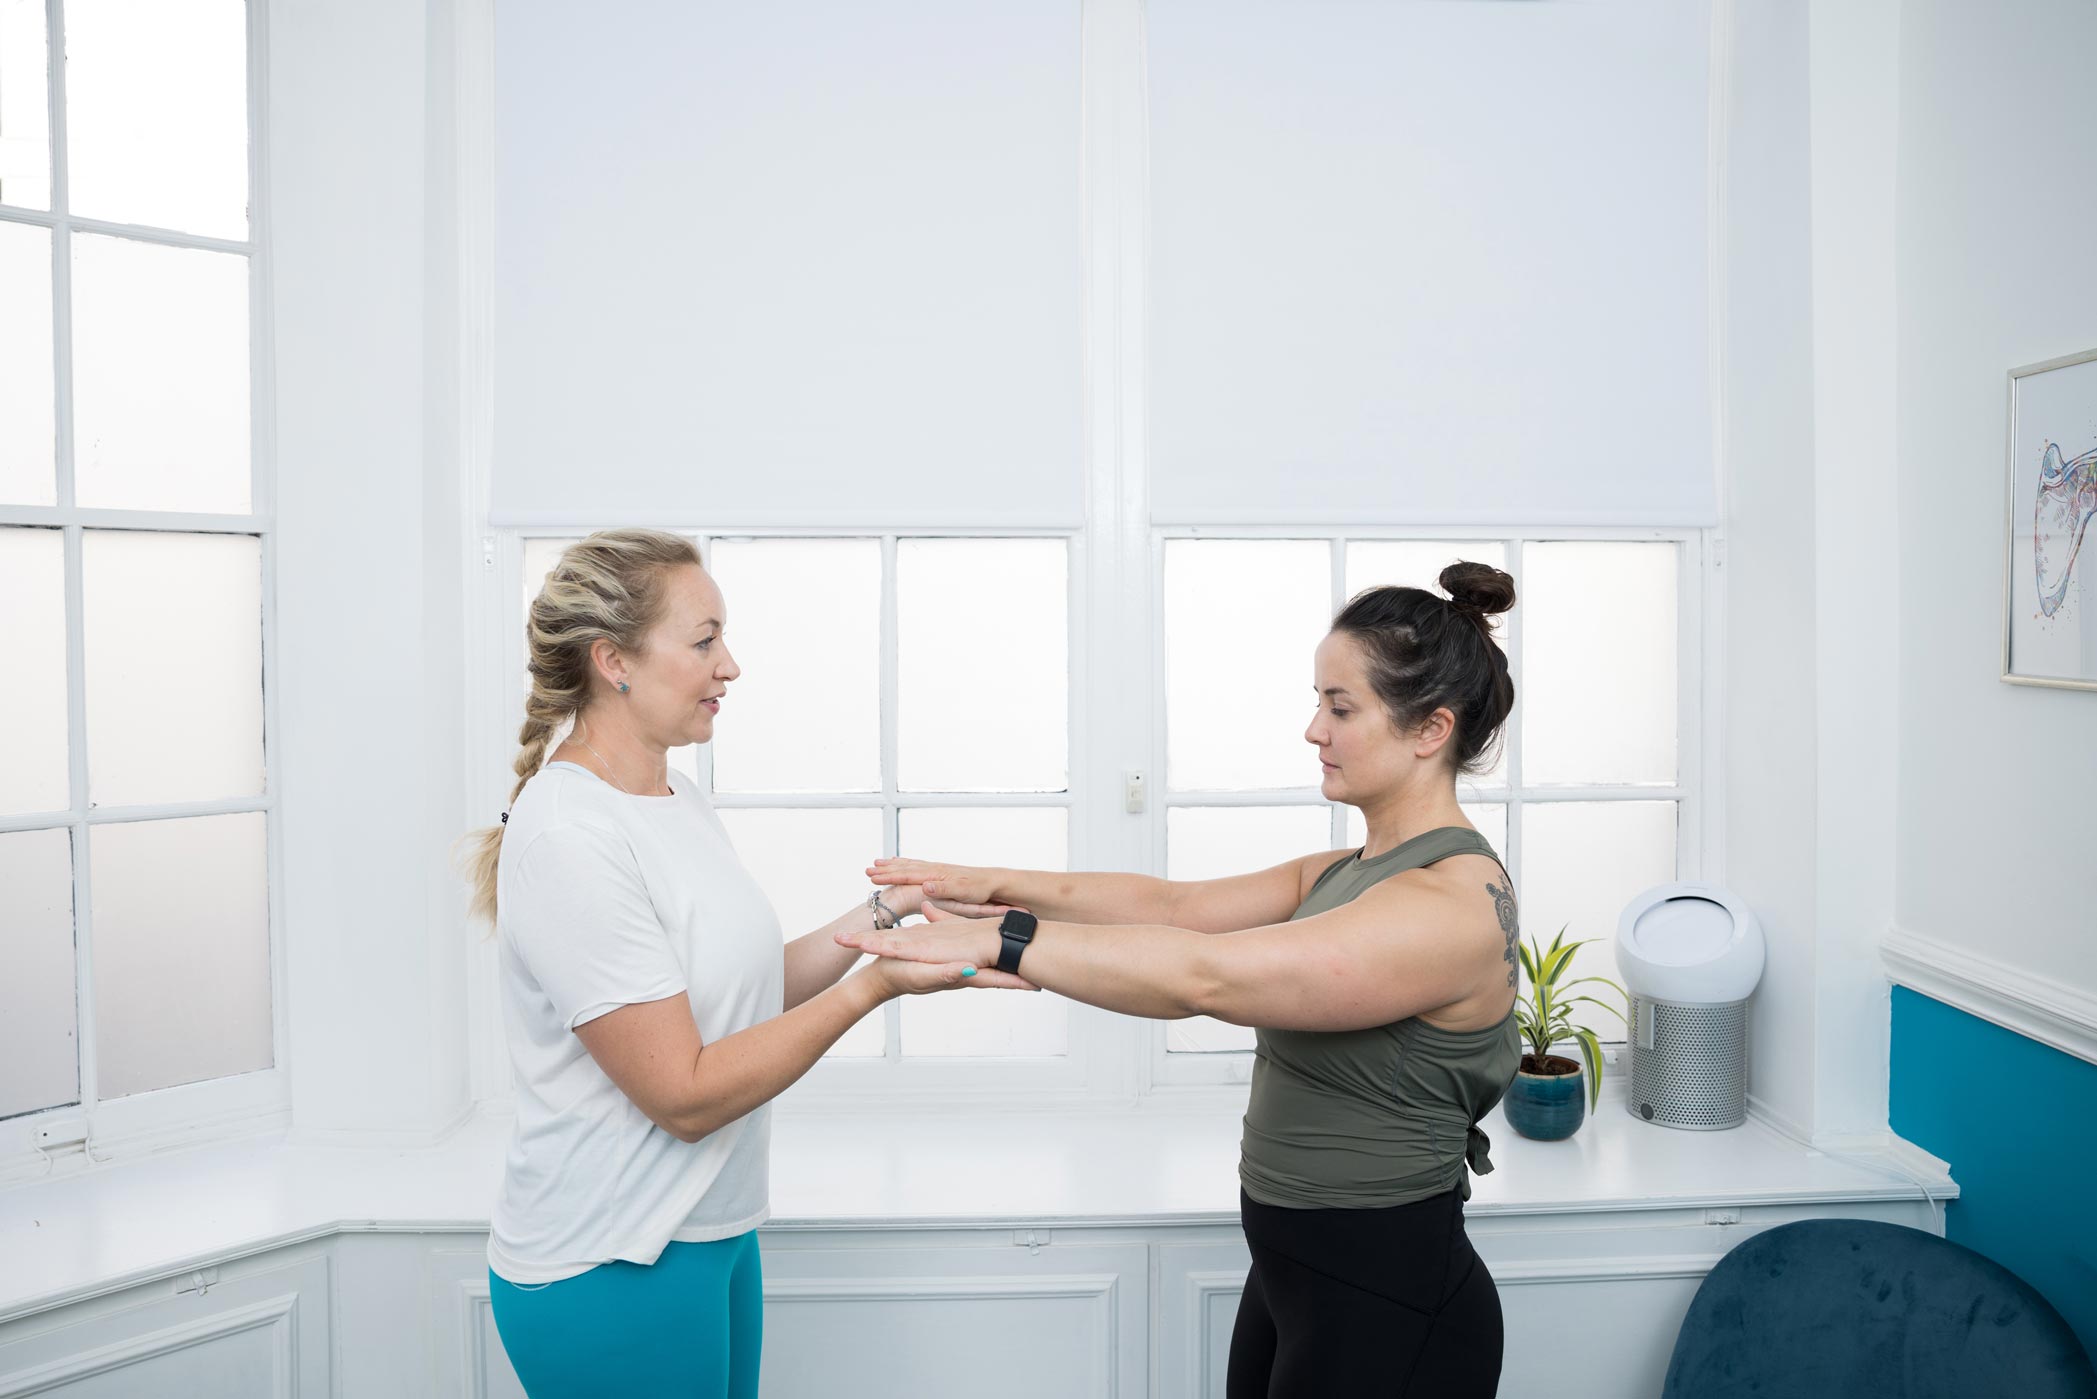 A therapist treats her client at a clinic in London Bridge during a health & fitness personal branding photography shoot